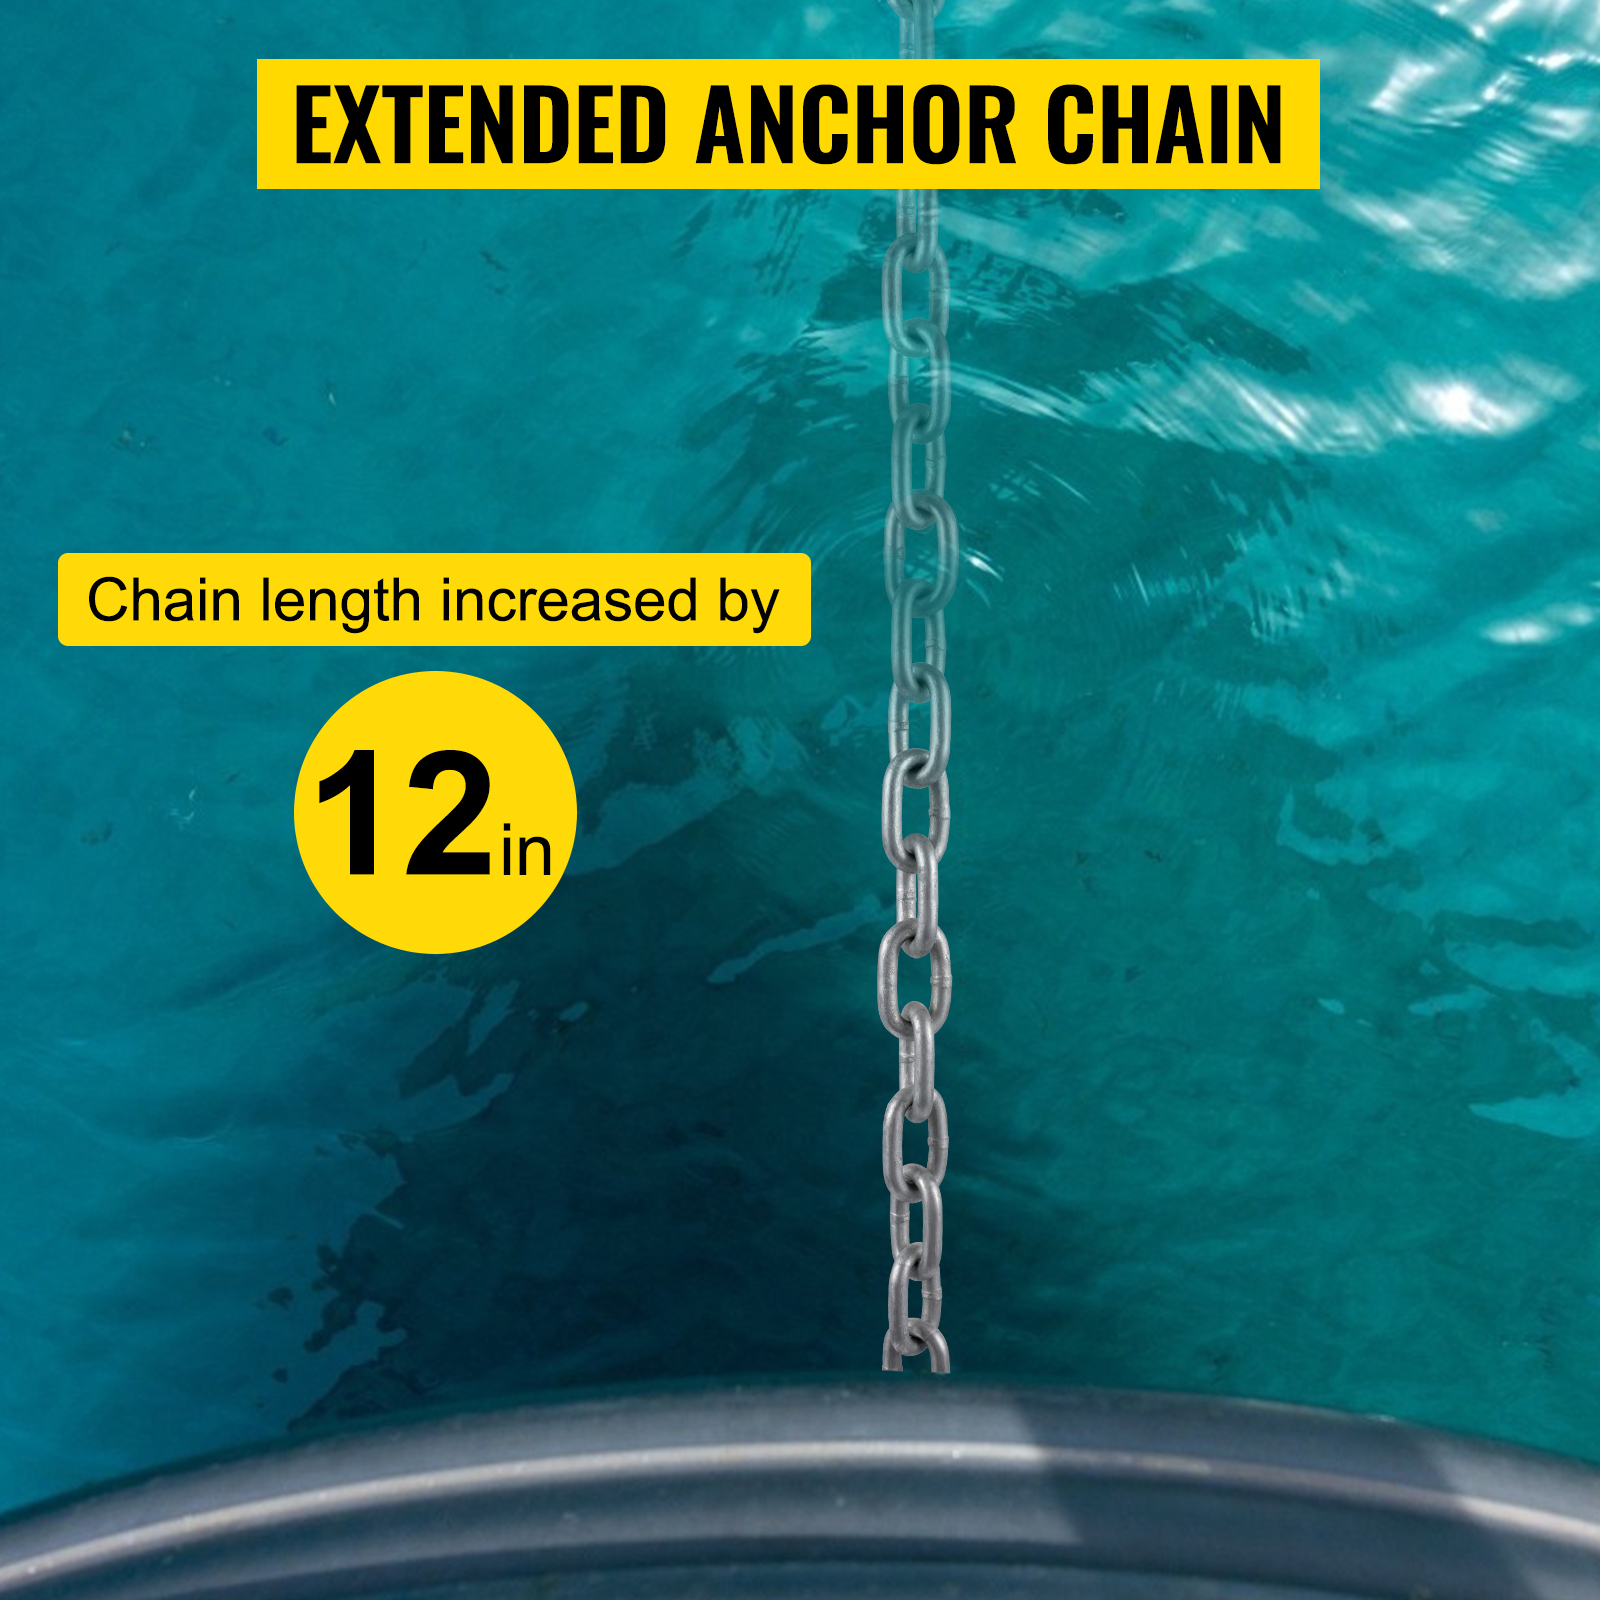 VEVOR Anchor Rode and Chain, 15' x 5/16 Boat Anchor Chain, 1/2 x 200